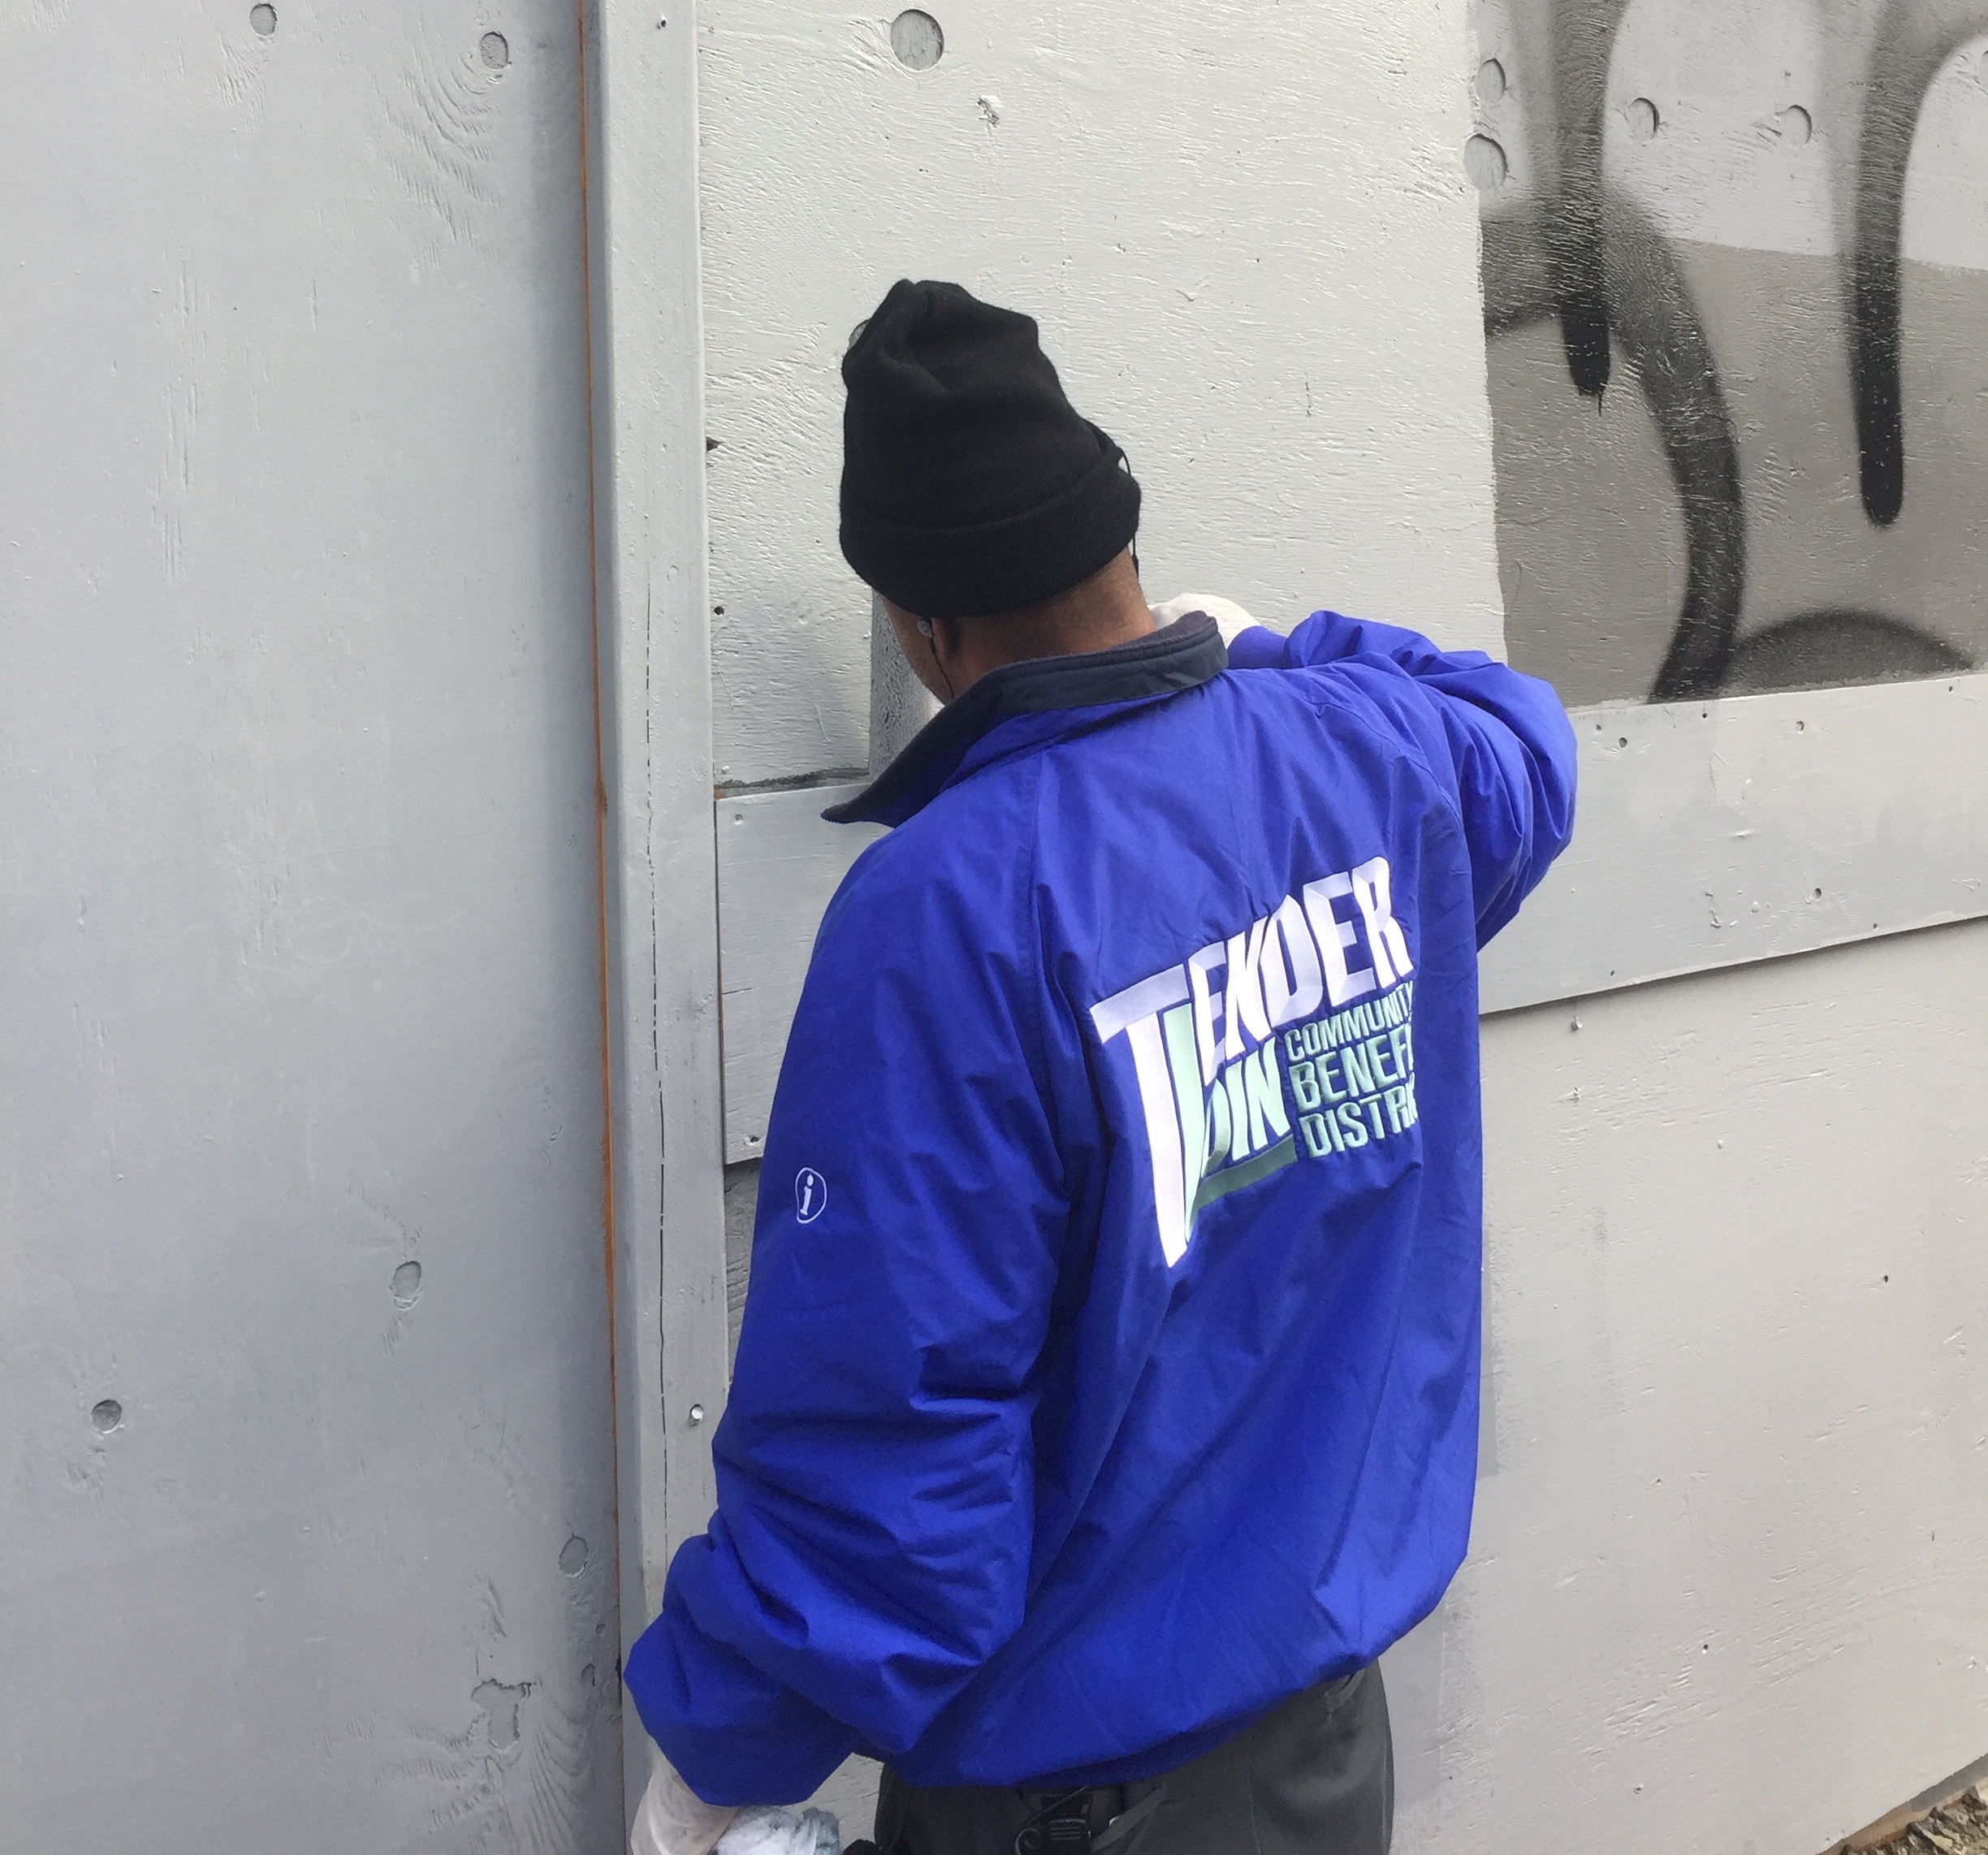 Have you seen these jackets out and about? Say hello to our Clean Team members!